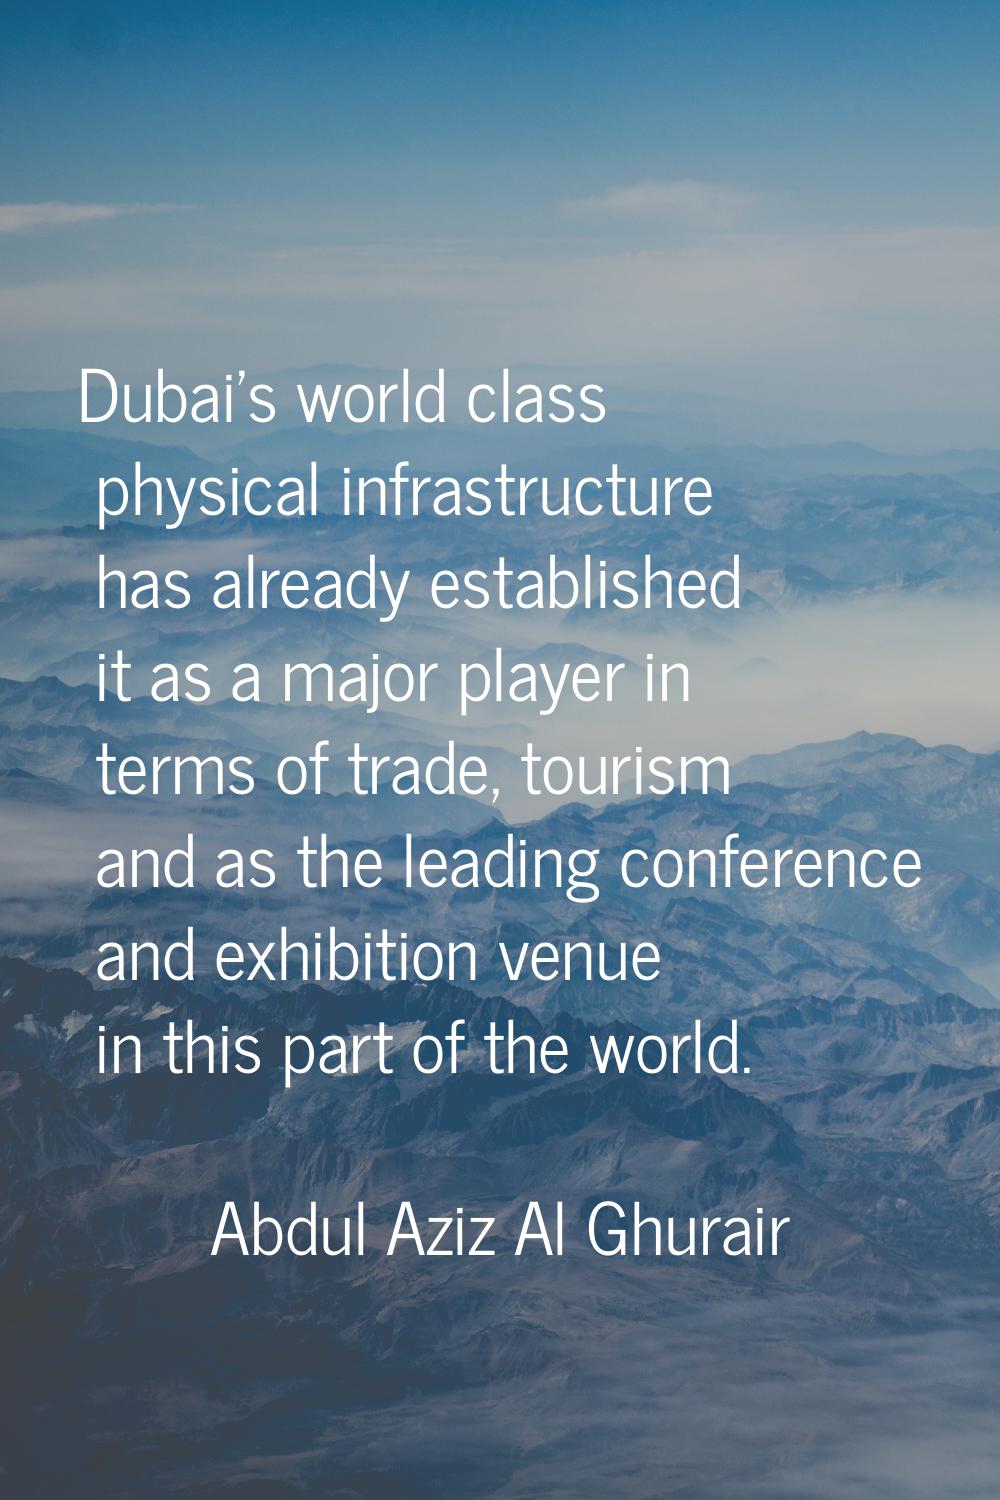 Dubai's world class physical infrastructure has already established it as a major player in terms o